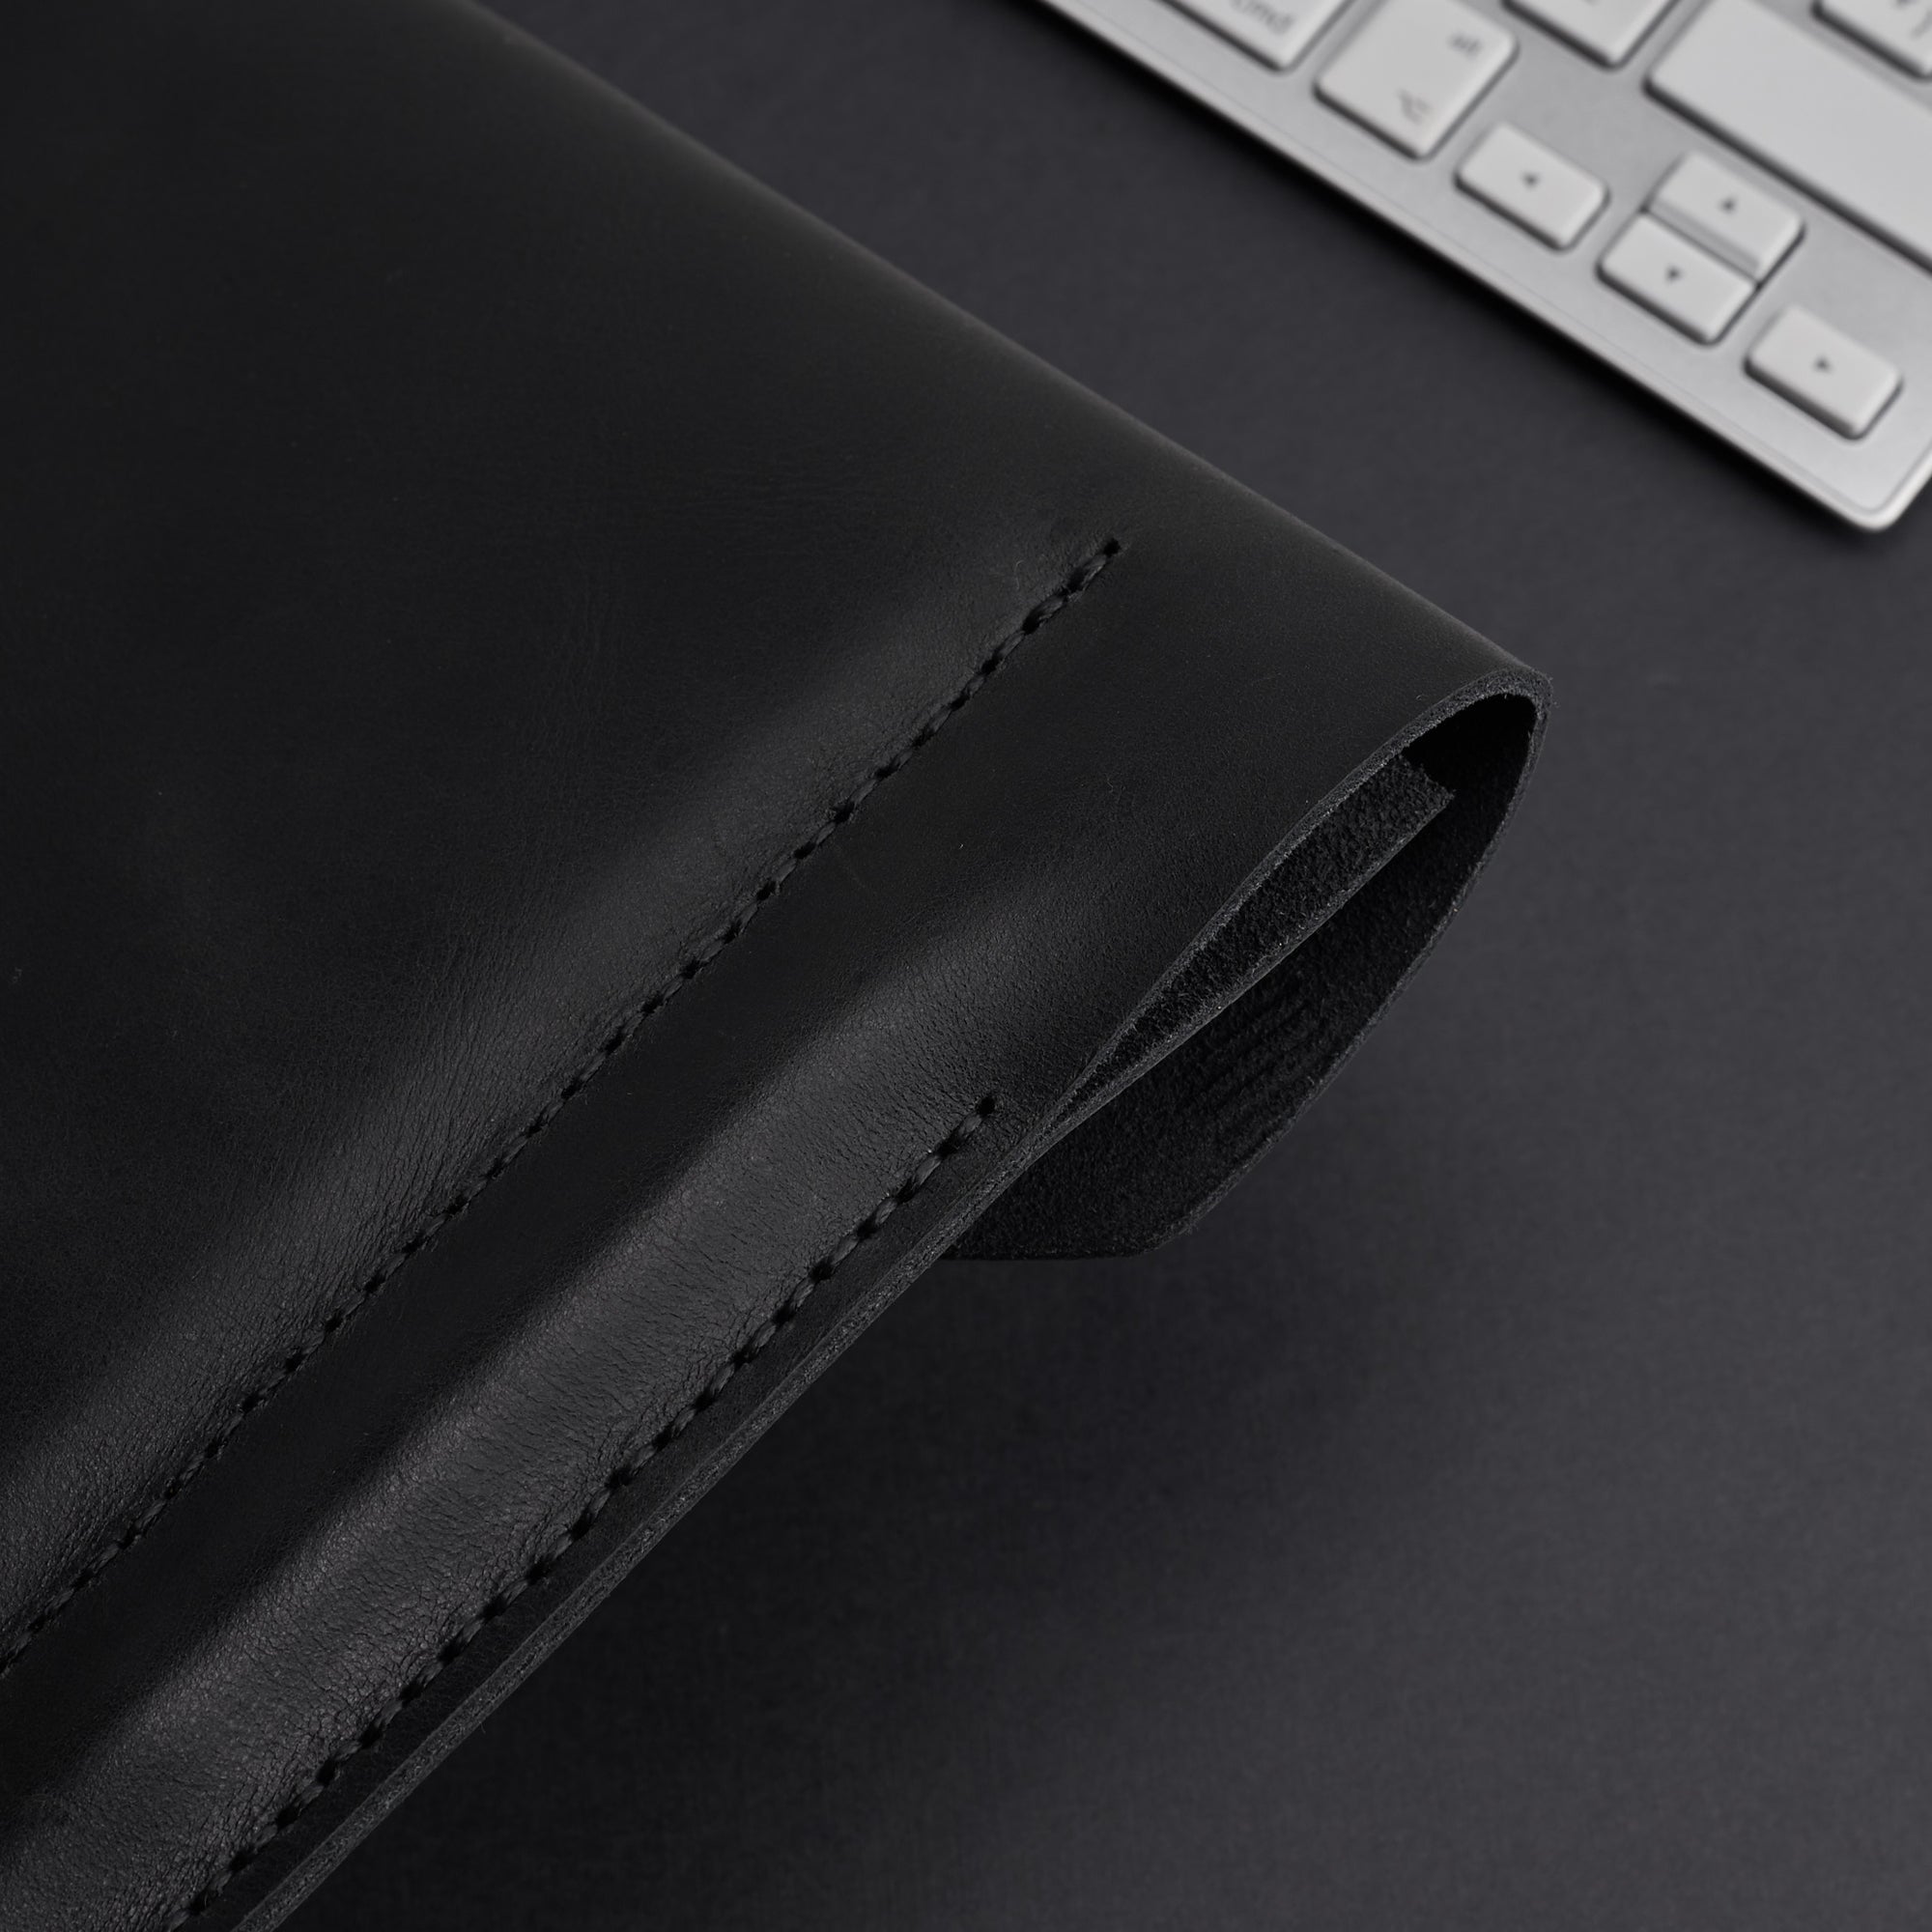 Apple Pencil detail. iPad Sleeve. iPad Leather Case Black With Apple Pencil Holder by Capra Leather